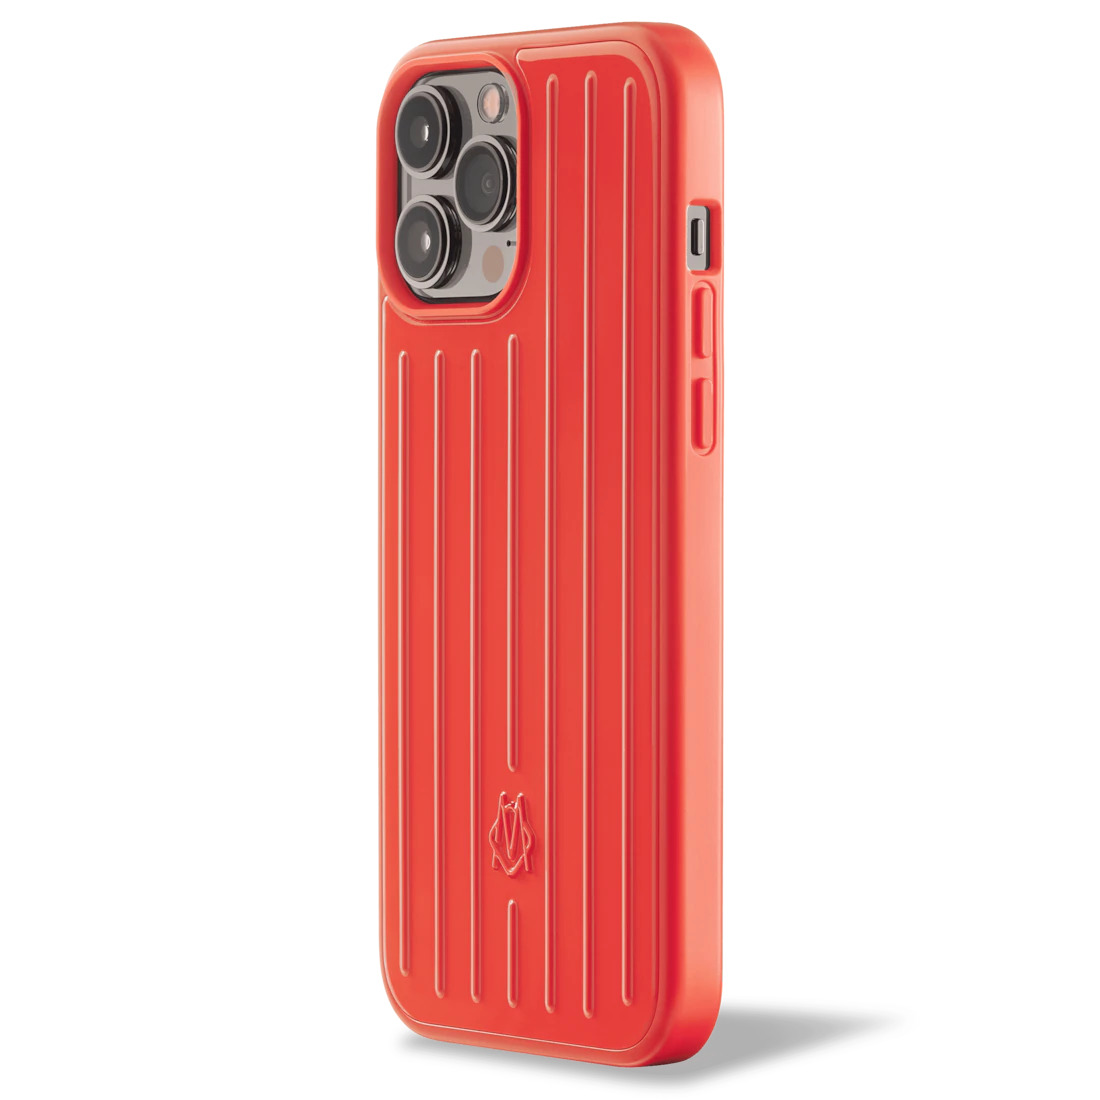 iPhone Accessories Flamingo Red Case for iPhone 13 Pro Max - 2